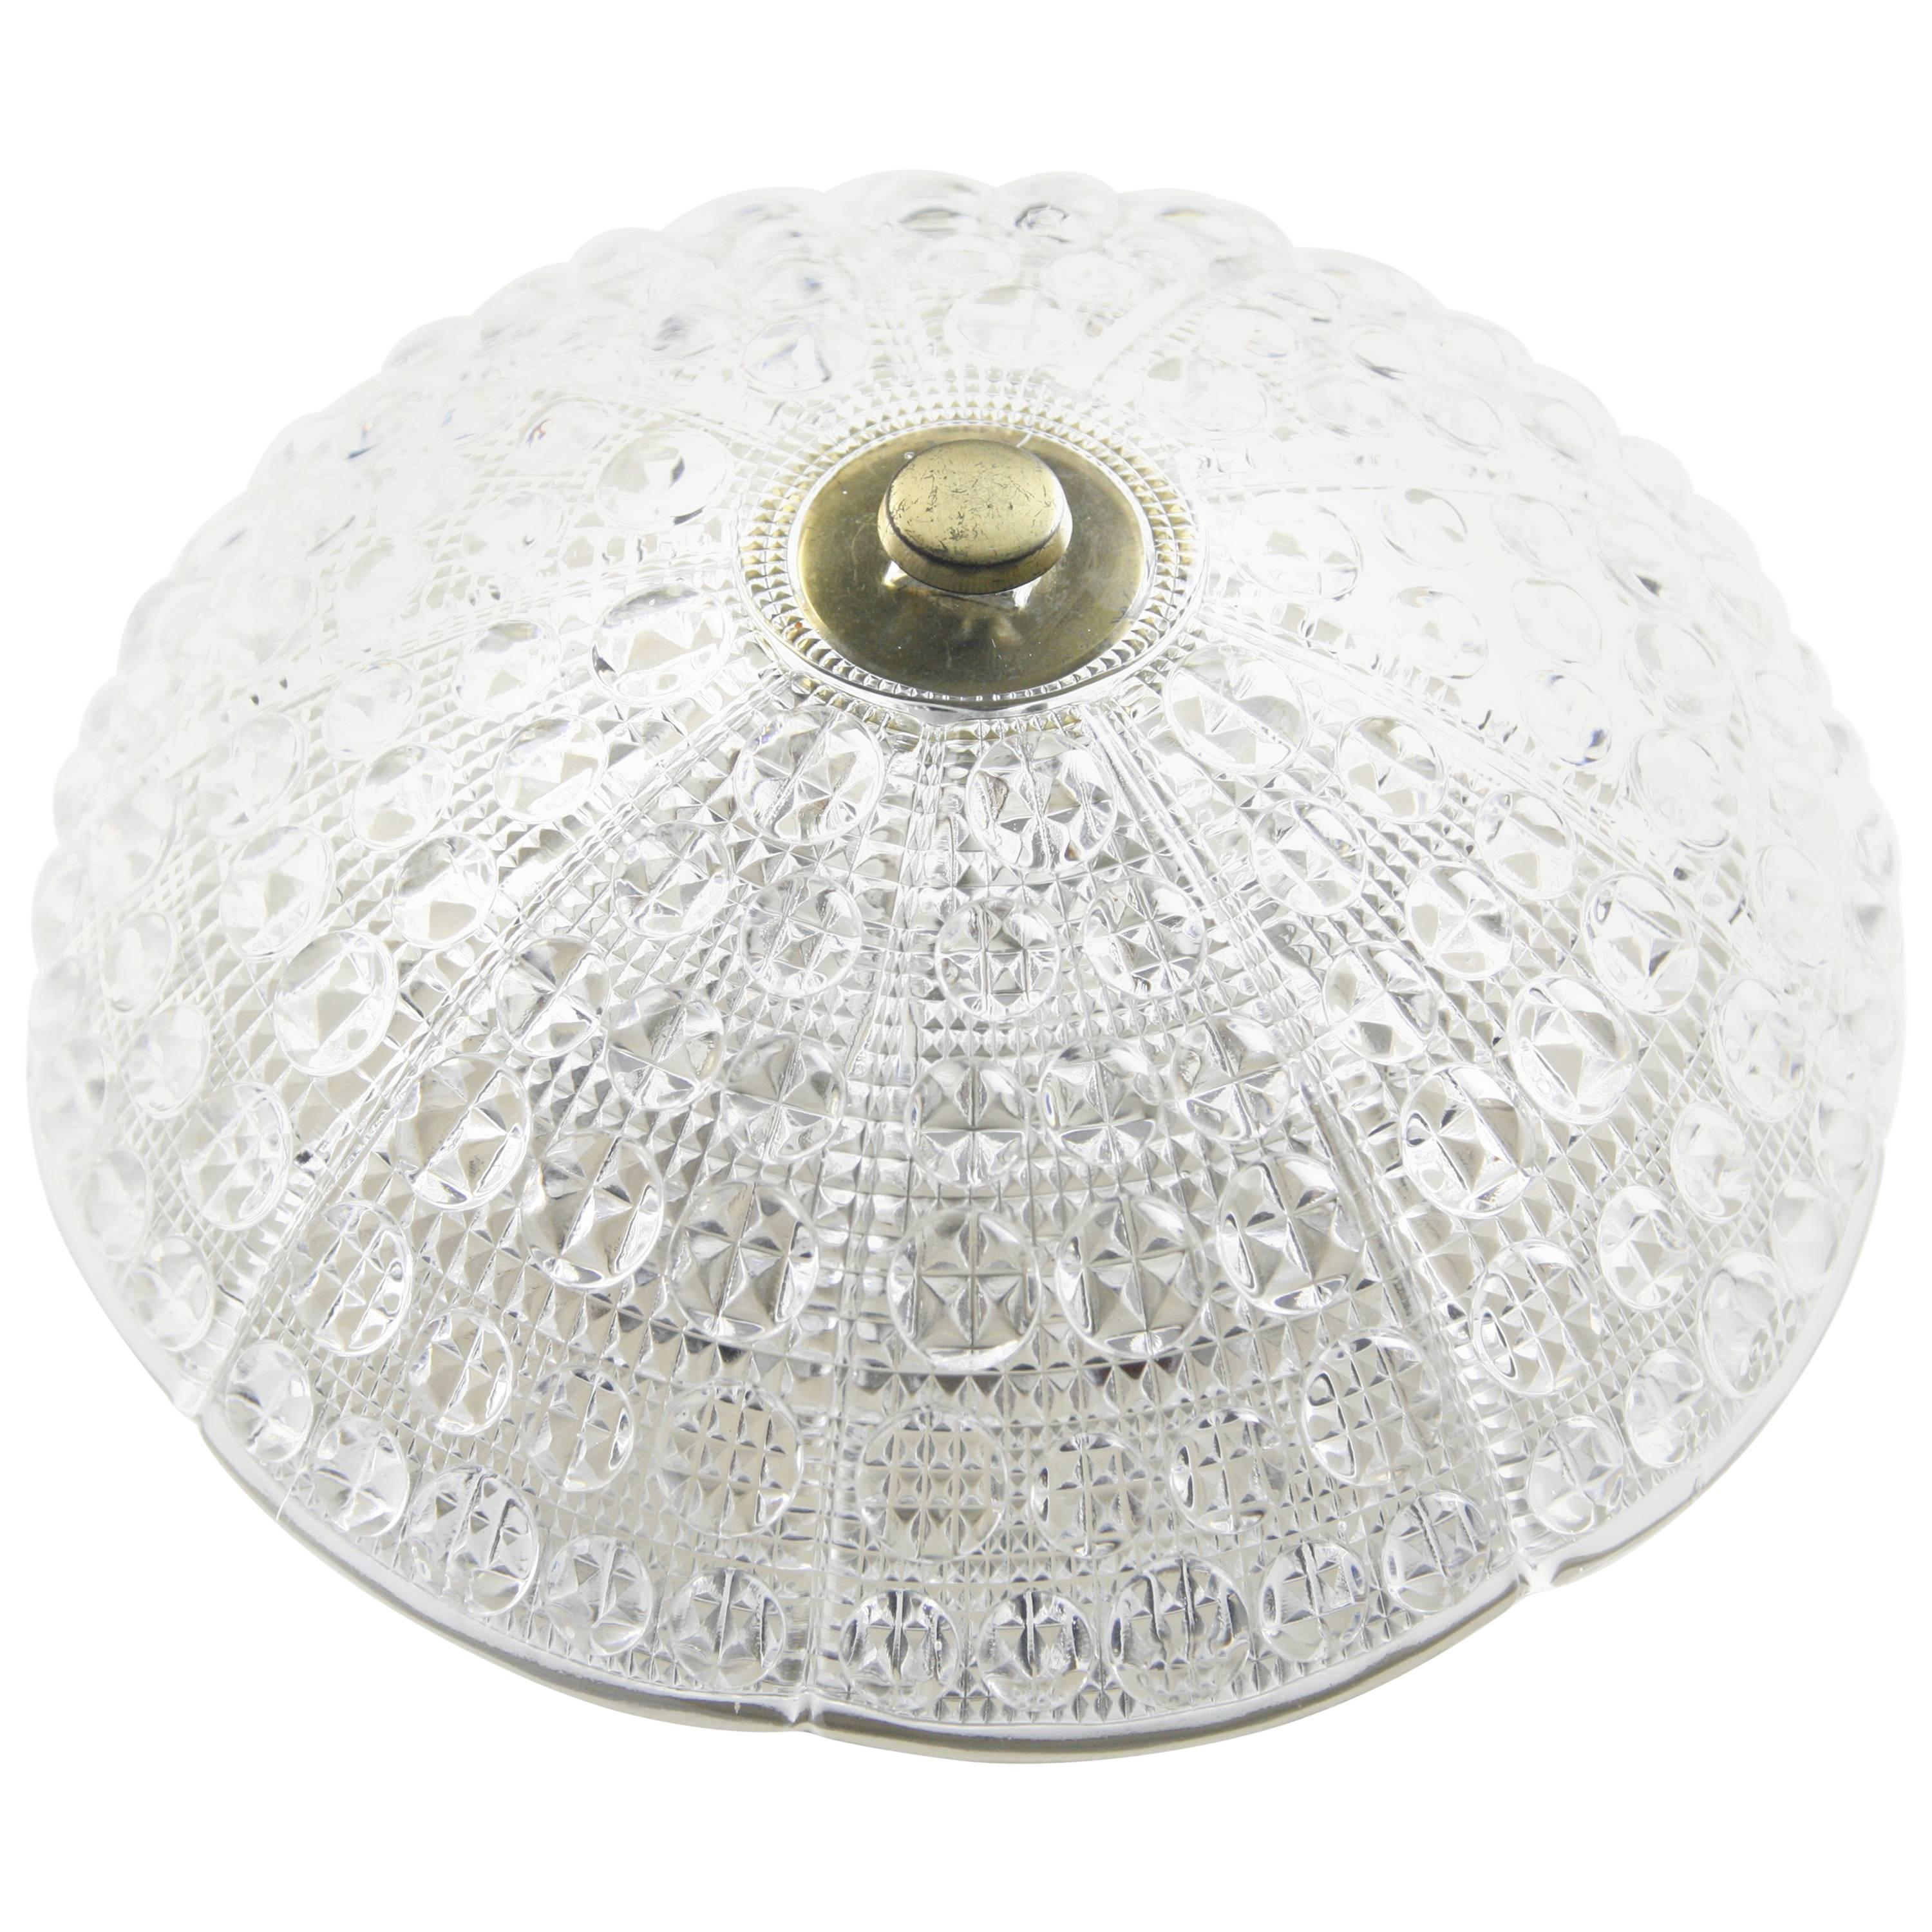 Orrefors flush mount ceiling plate is cream white metal with six European candelabra sockets the shade is a dome shaped pressed bubble crystal and details in brass.

 